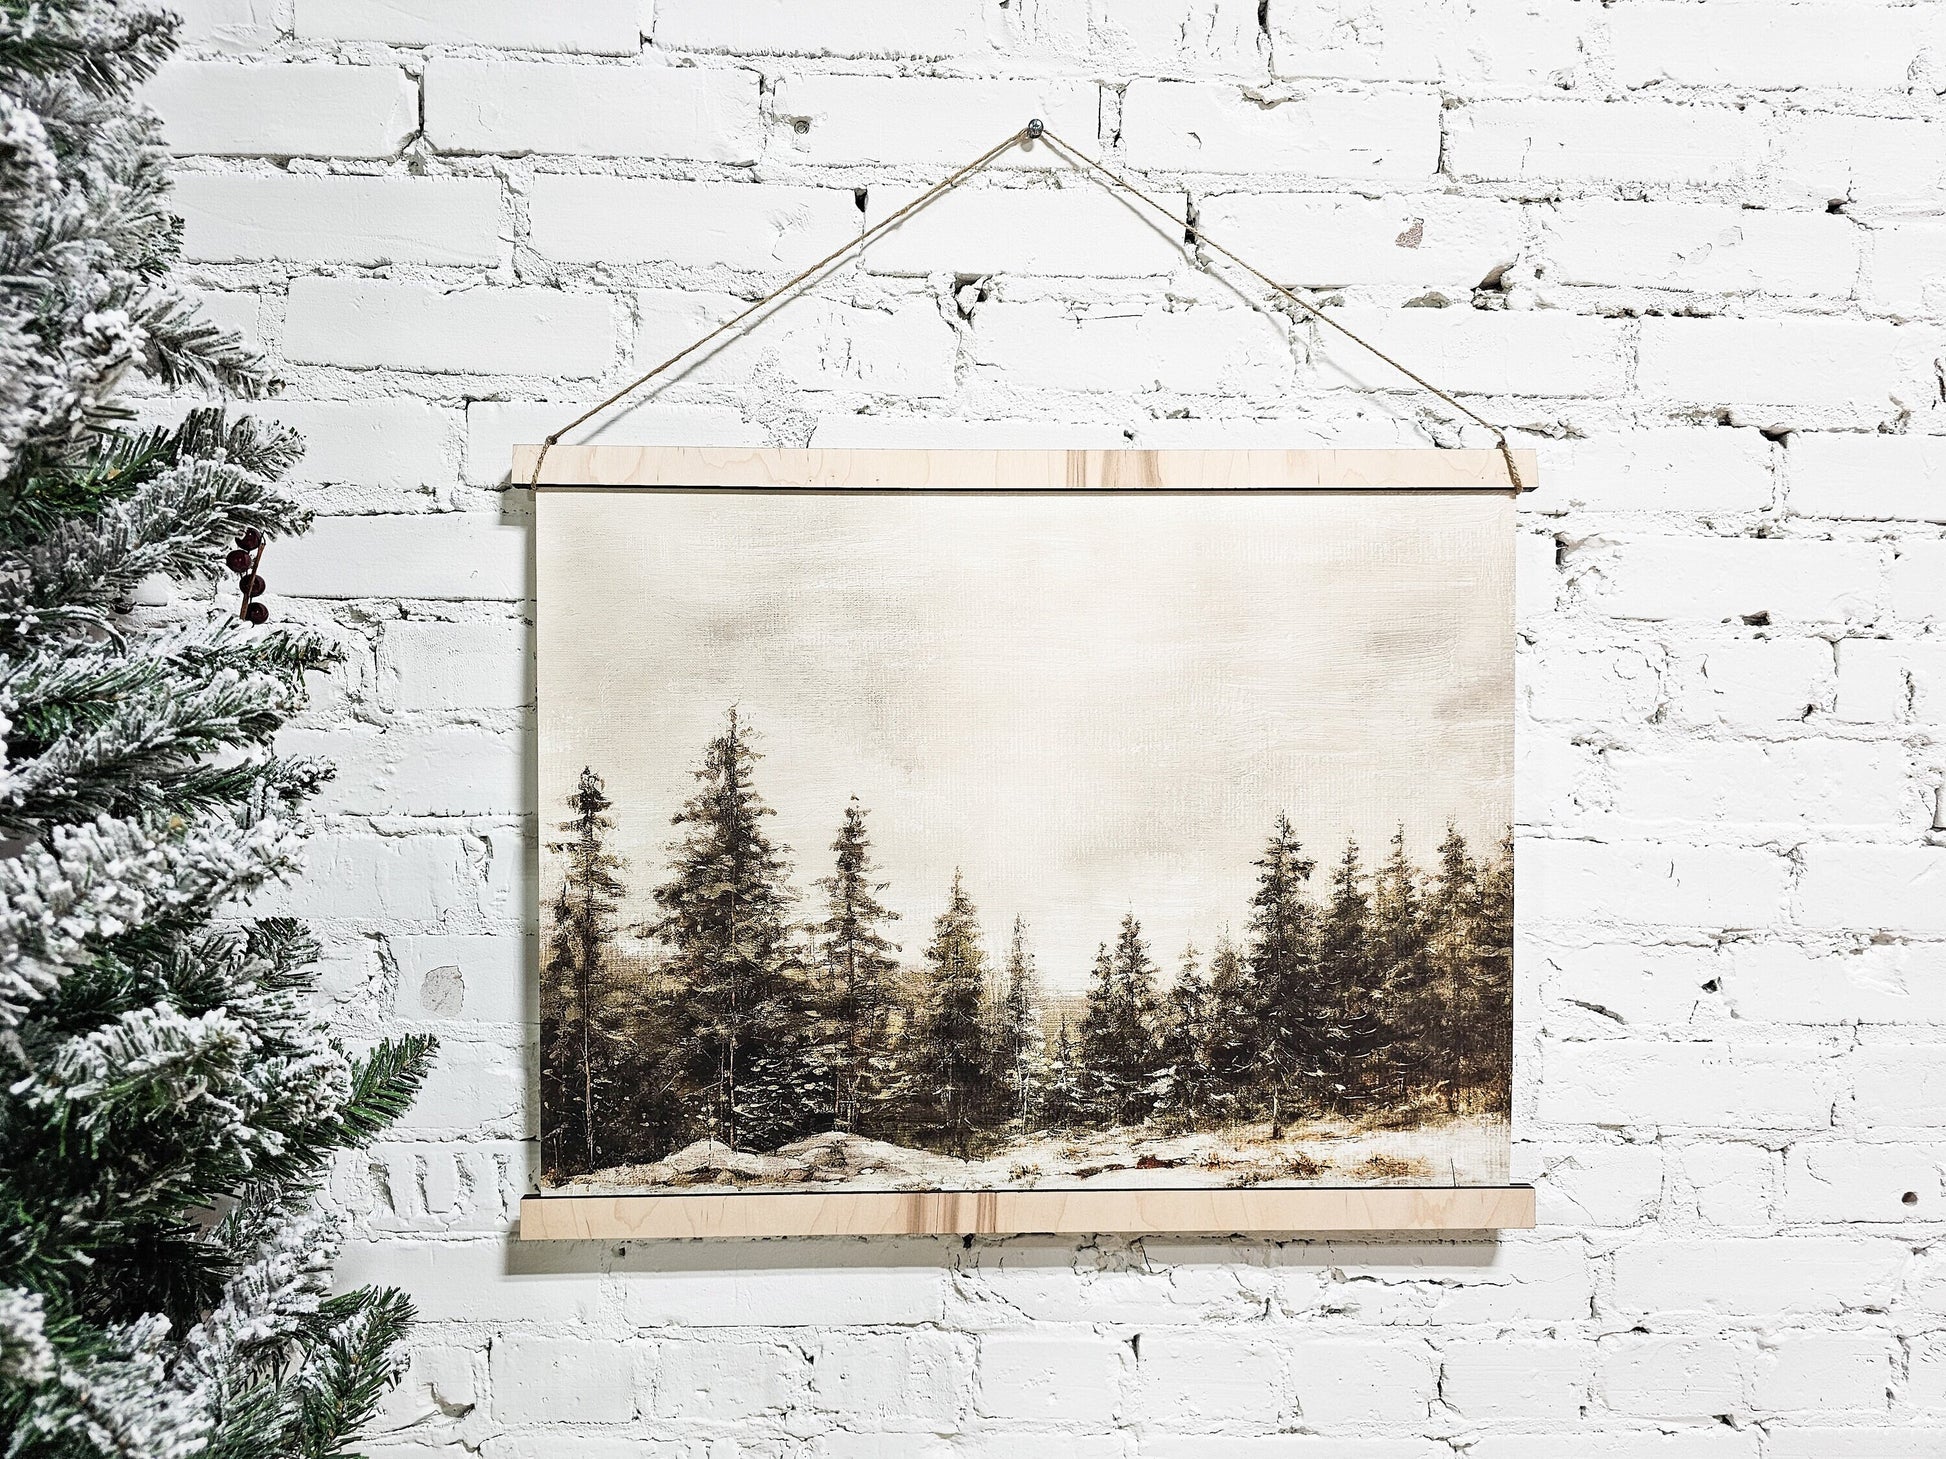 Winter Landscape Wall Art, Snowy Pine Trees Hanging Framed Canvas Decor Sign, Natural, Neutral, Simple, Minimal, Peaceful Home Decoation